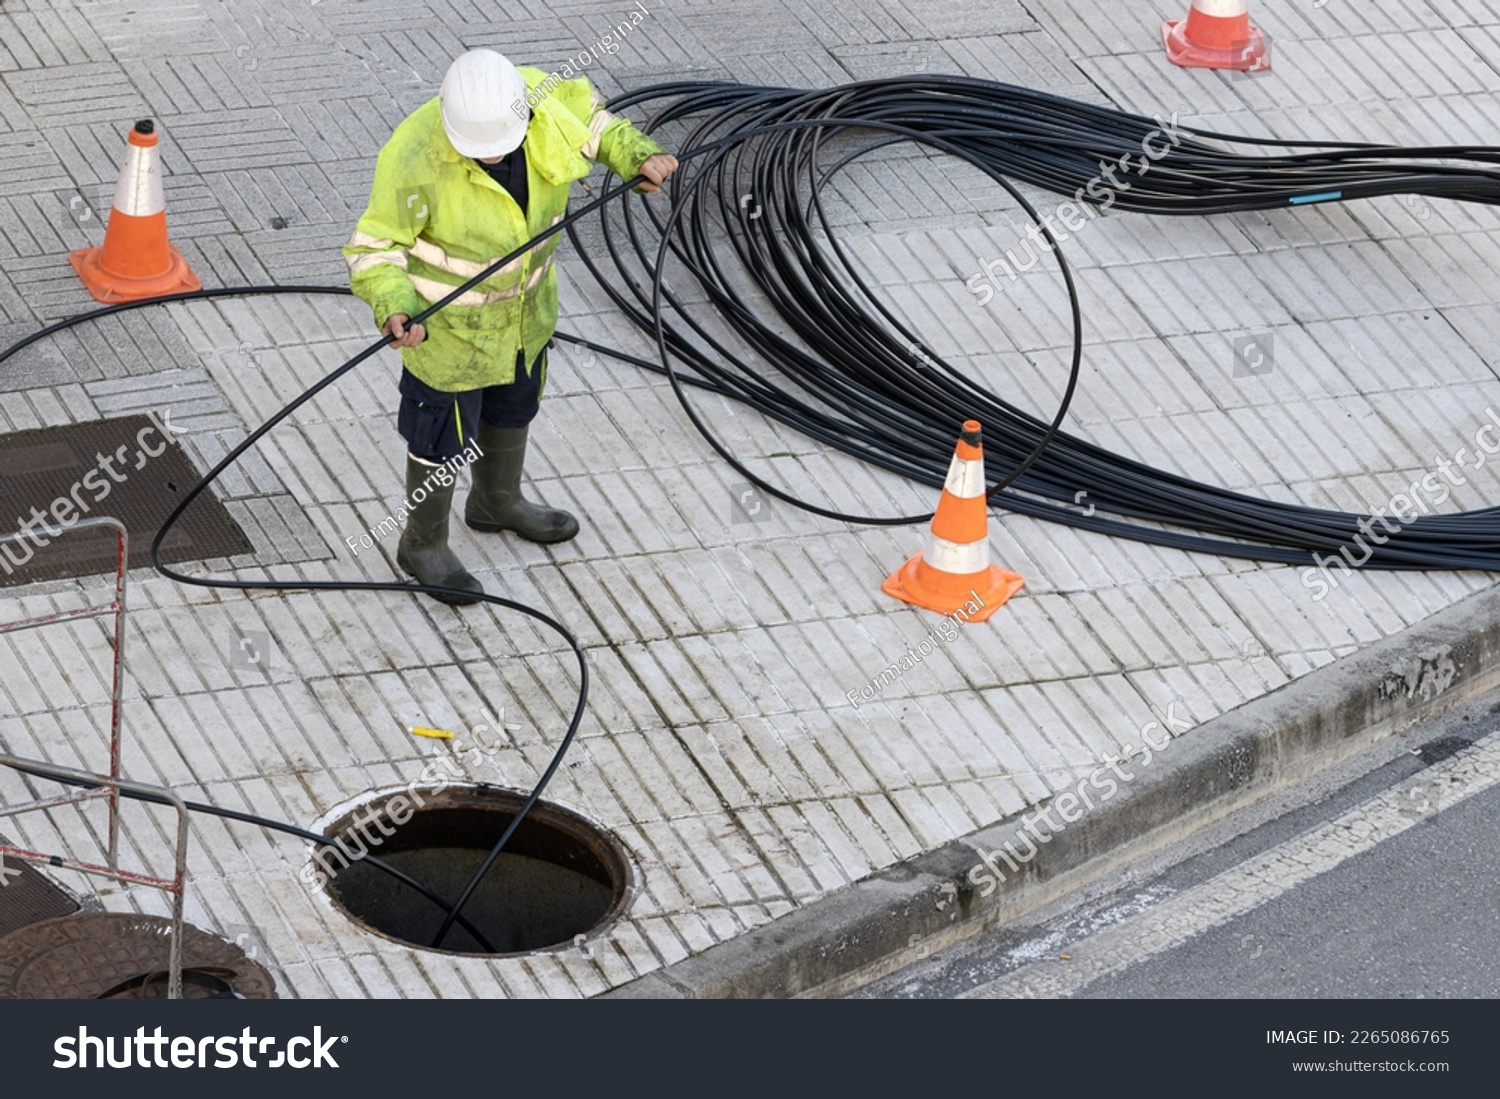 A worker is performing maintenance tasks on a communication cable located on the sidewalk of a city #2265086765